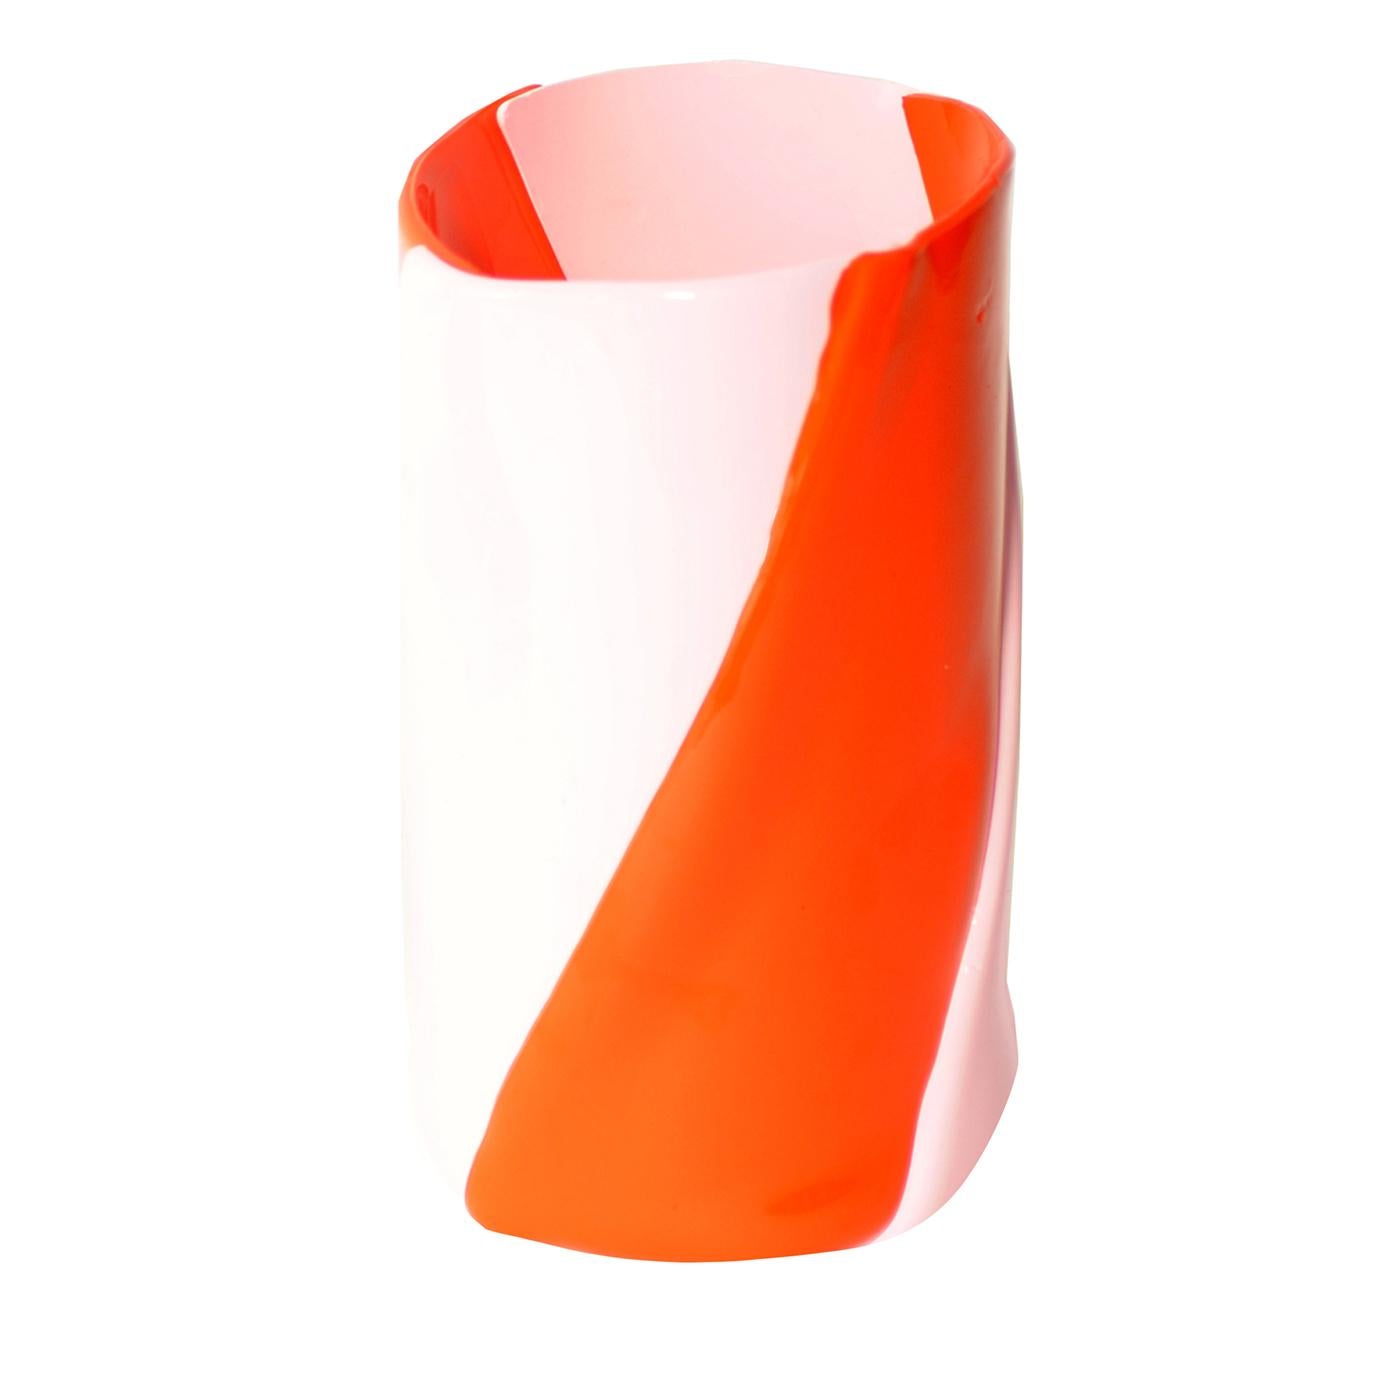 Vase in soft resin designed by Enzo Mari in 2011 for Lezioni by Enzo Mari collection.